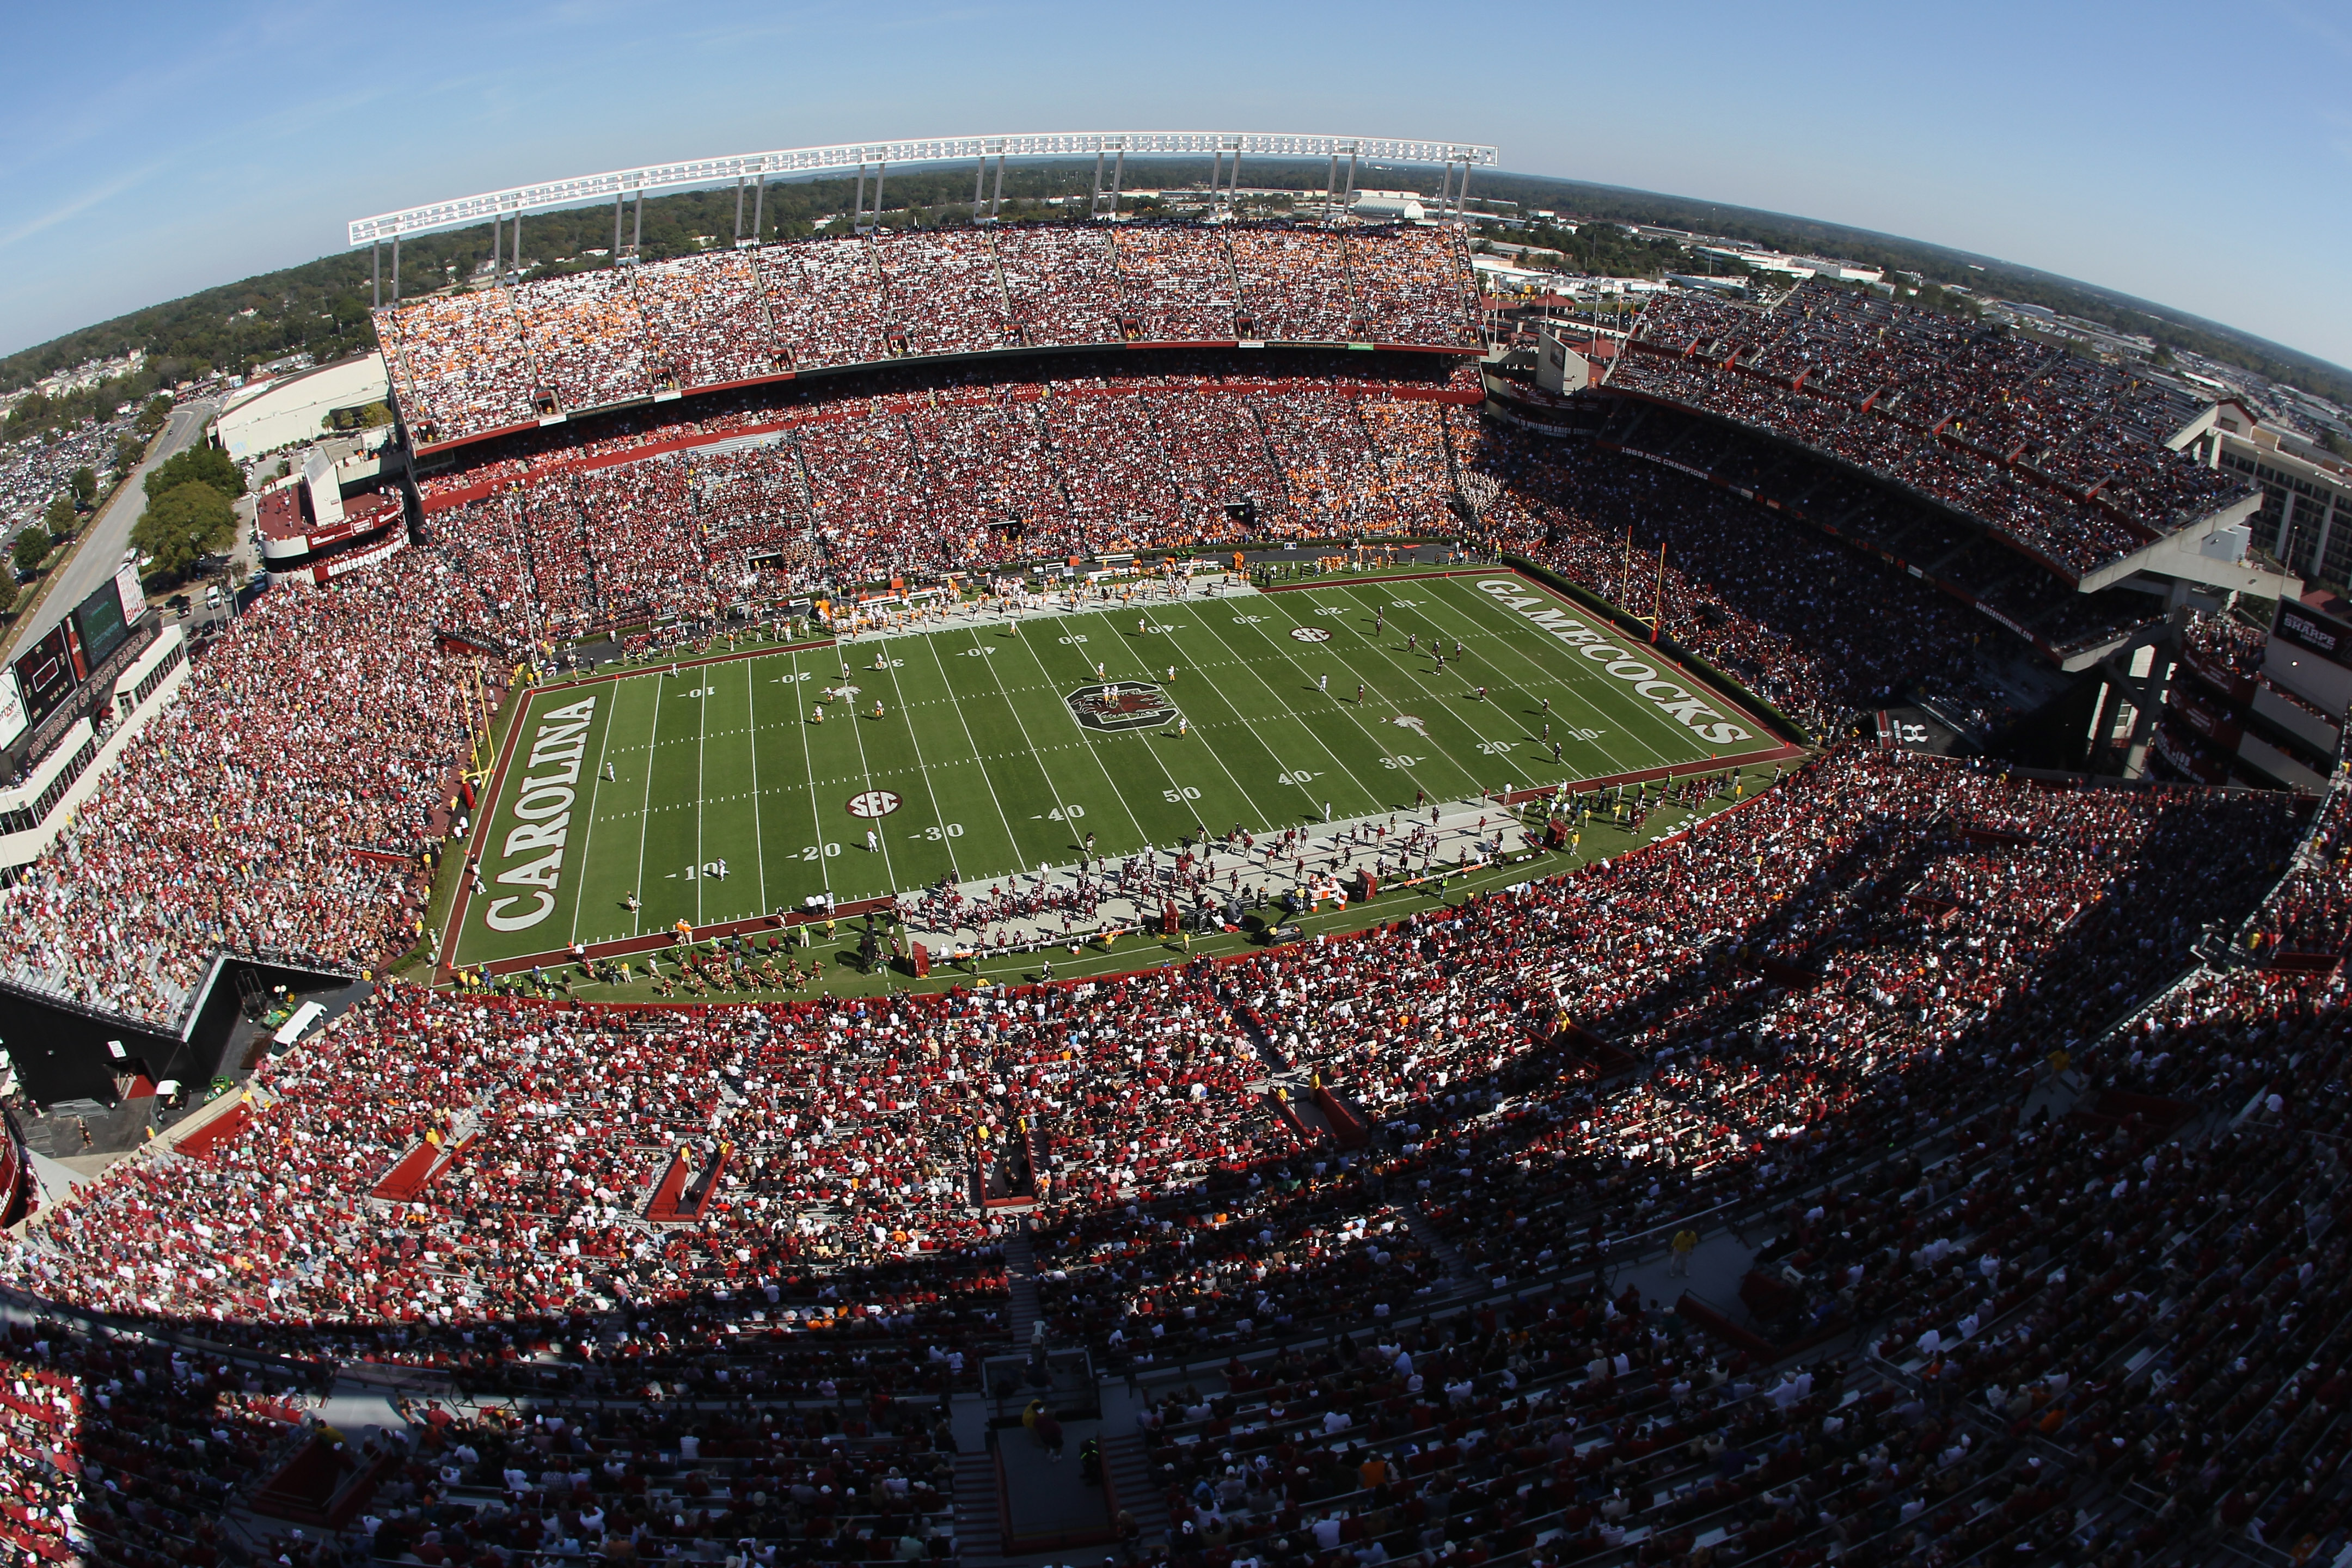 COLUMBIA, SC - OCTOBER 30:  A general view of the Tennessee Volunteers versus the South Carolina Gamecocks during their game at Williams-Brice Stadium on October 30, 2010 in Columbia, South Carolina.  (Photo by Streeter Lecka/Getty Images)